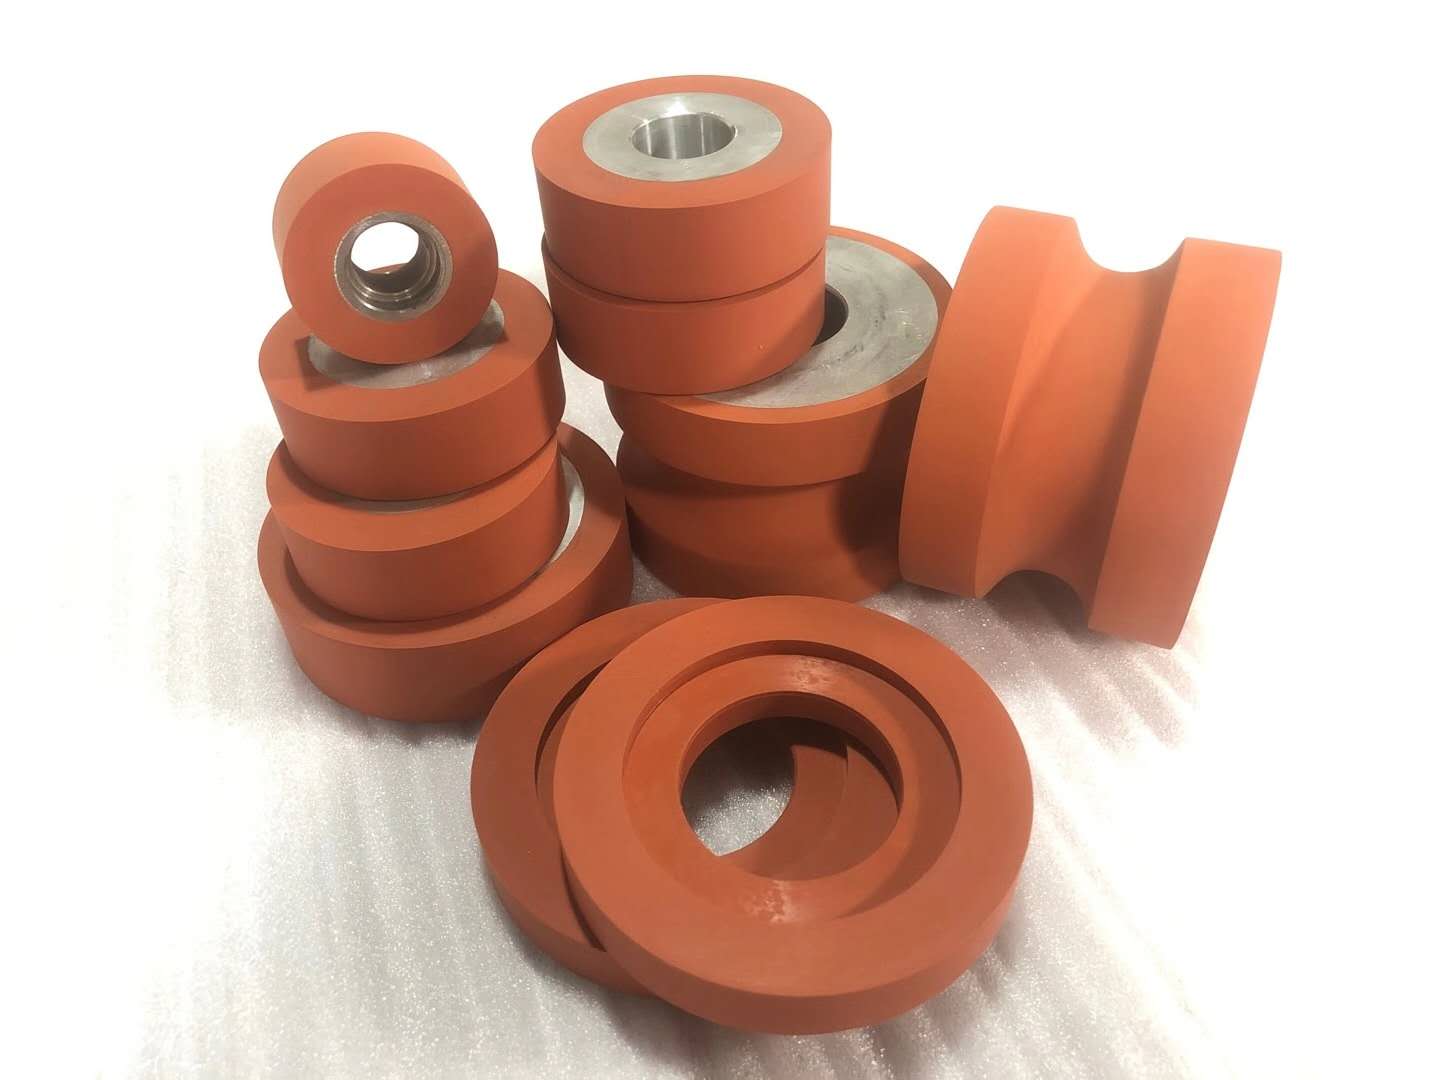   Silicone Rubber wheel is ideal for transferring decorative cylindrical and large flat or curved surfaces. Its exclusive formula of silicone has first-class softness and elasticity, can easily match the different surfaces of plastic parts, and has high heat resistance, easy to polish the shape, ensuring the smooth application of heating transfer and lamination foil coating.